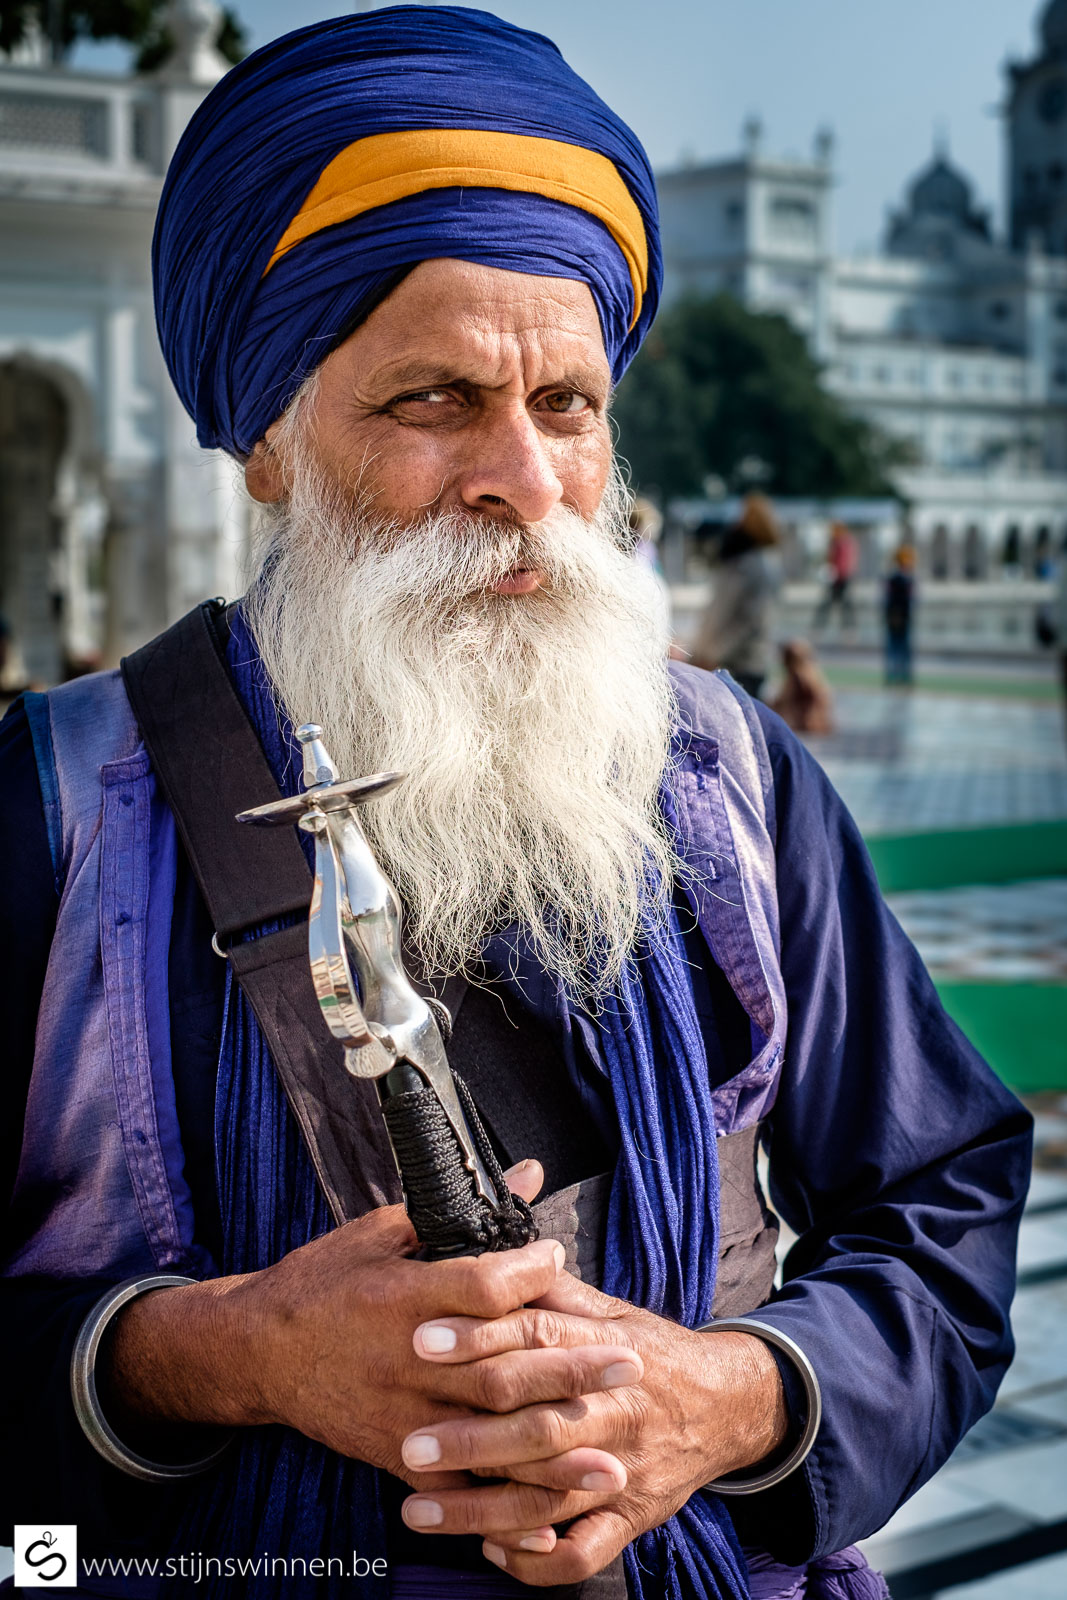 Proud Sikh Warrior with his sword in Amritsar